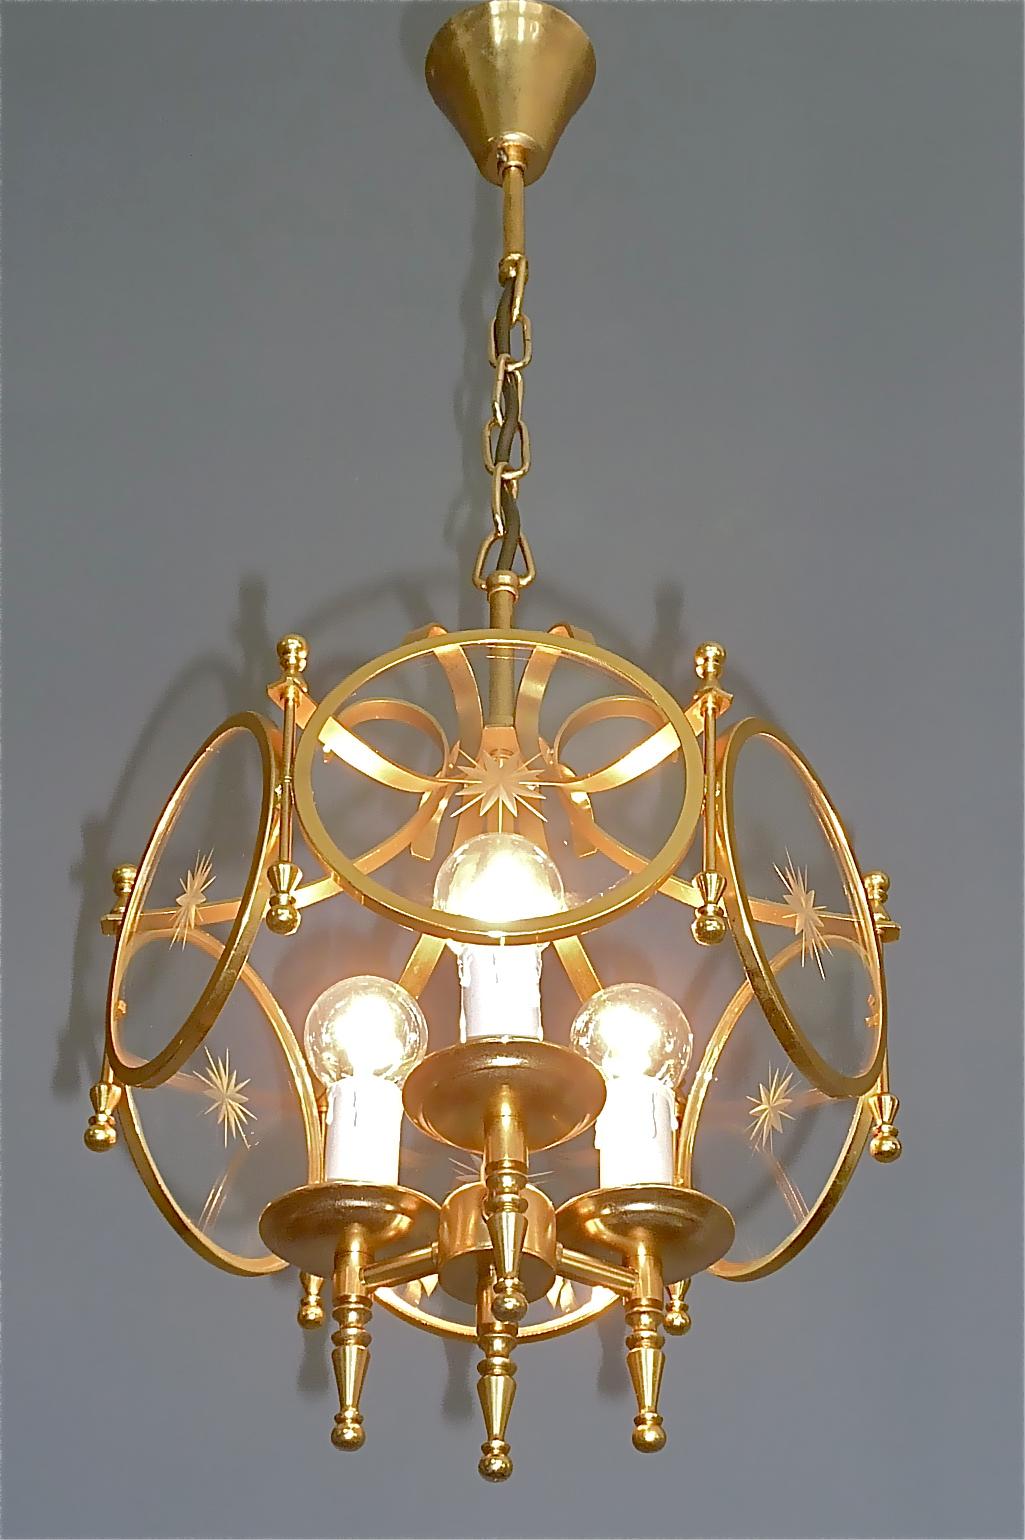 Faceted Rare French Maison Jansen Lantern Gilt Brass Crystal Glass 1960 Bagues Charles For Sale